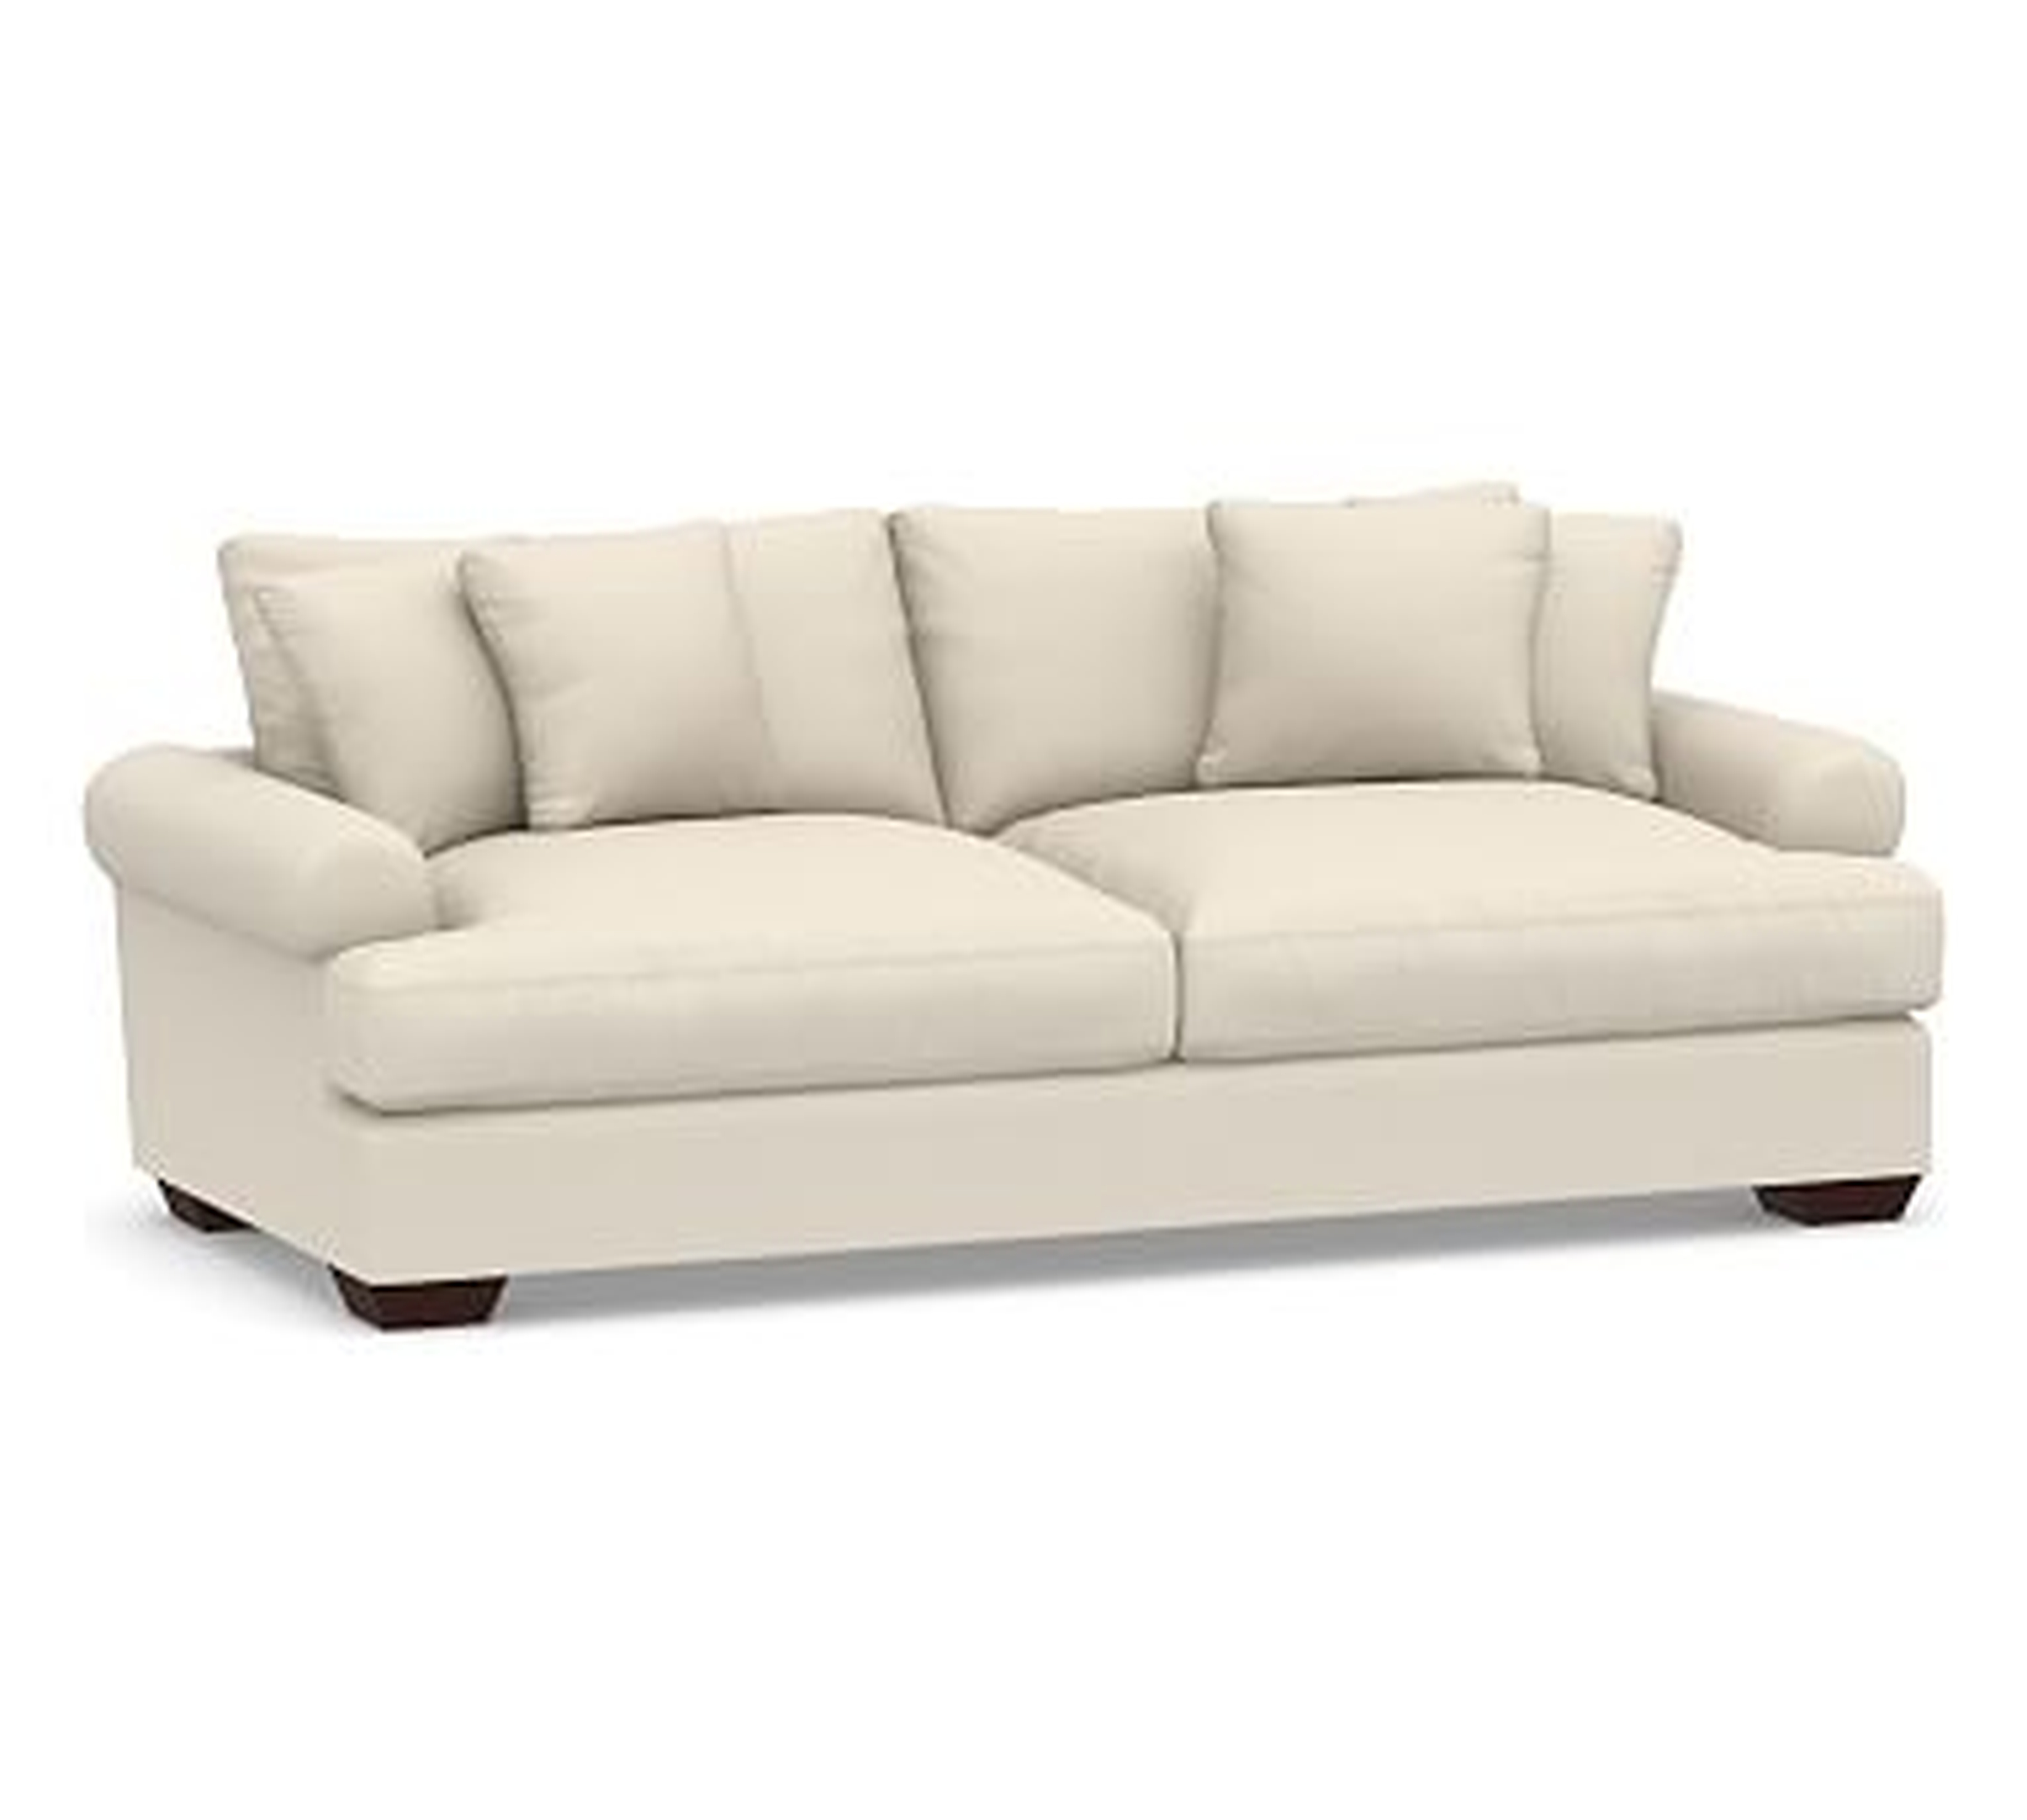 Sullivan Roll Arm Upholstered Deep Seat Grand Sofa 95", Down Blend Wrapped Cushions, Performance Brushed Basketweave Ivory - Pottery Barn